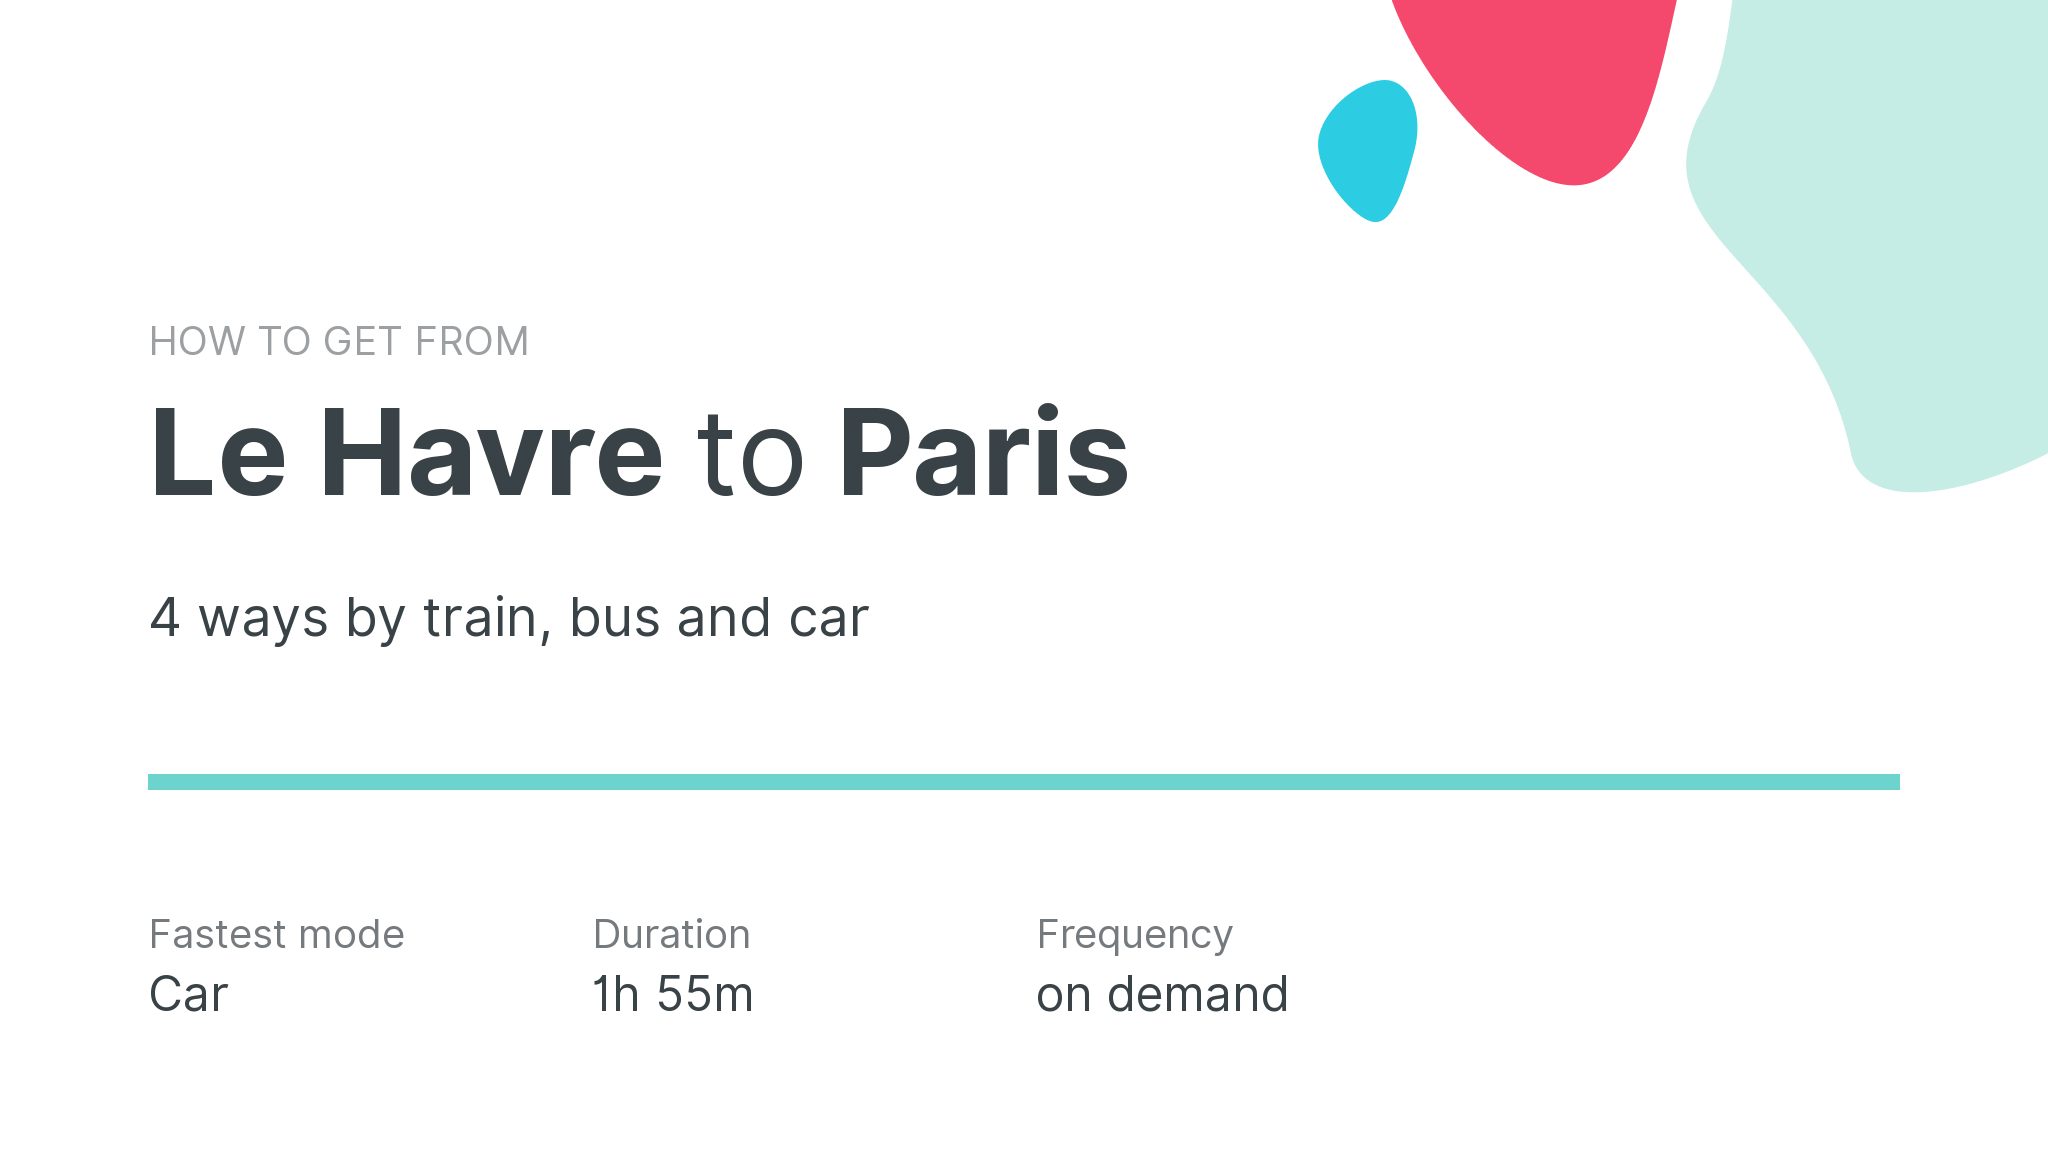 How do I get from Le Havre to Paris